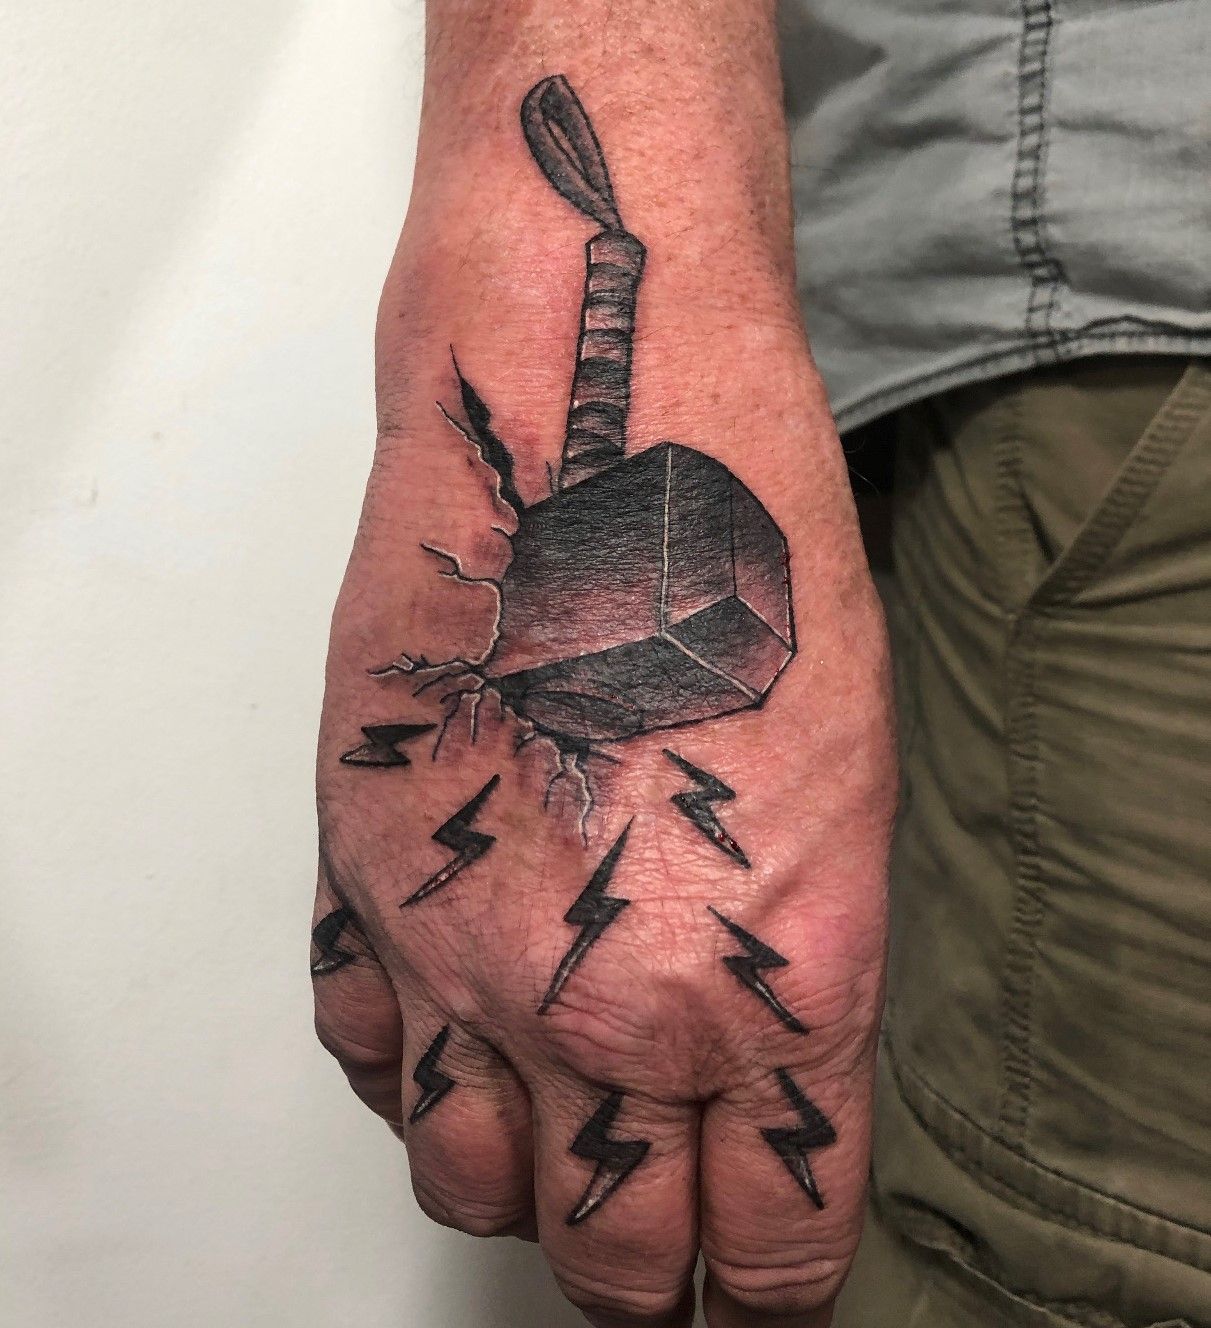 Thor's hammer by sea.blue.dot in Vilnius Lithuania. : r/tattoos